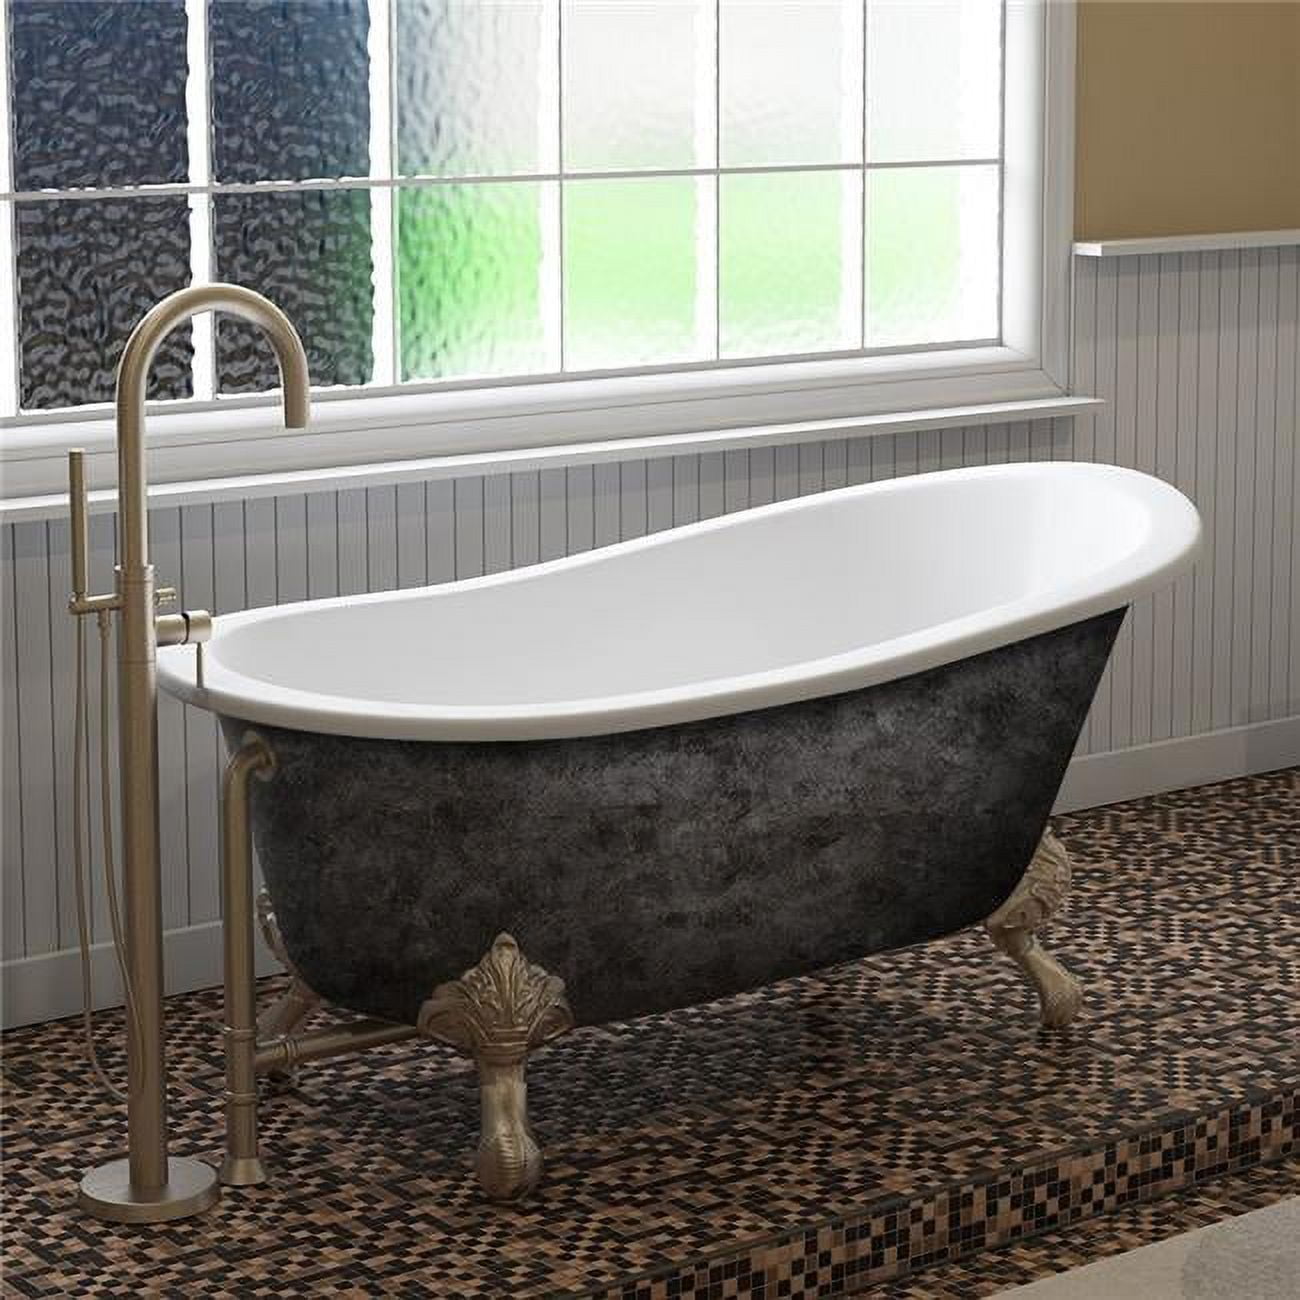 St61-nh-bn-sp 61 X 30 In. Scorched Platinum Cast Iron Slipper Bathtub With No Faucet Holes & Brushed Nickel Feet